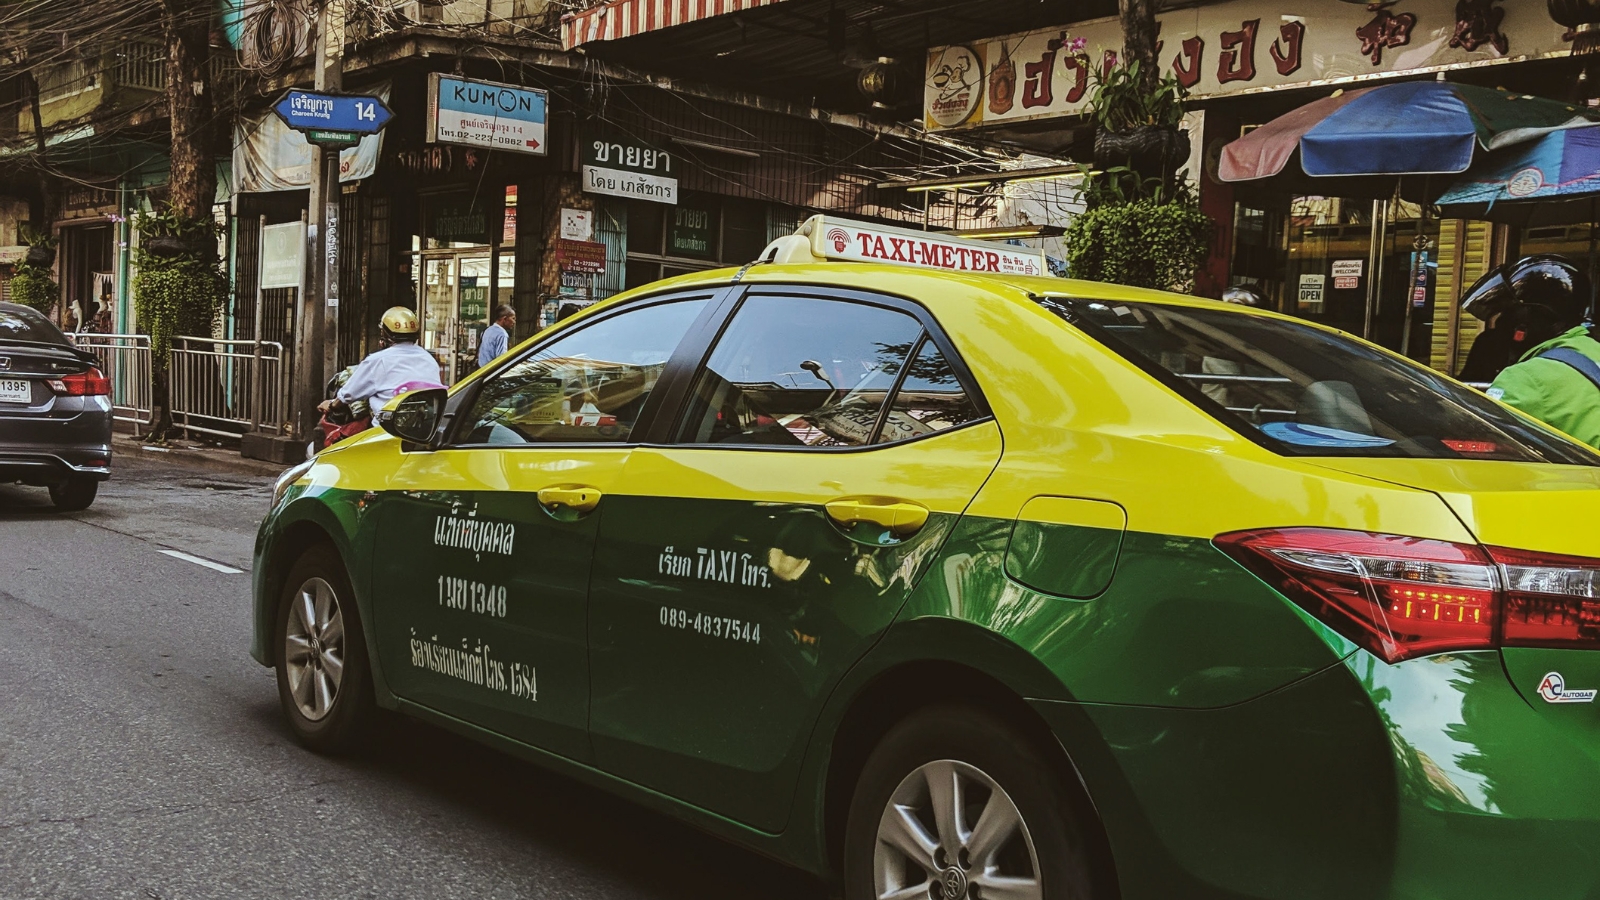 Taximeter on the street in Bangkok